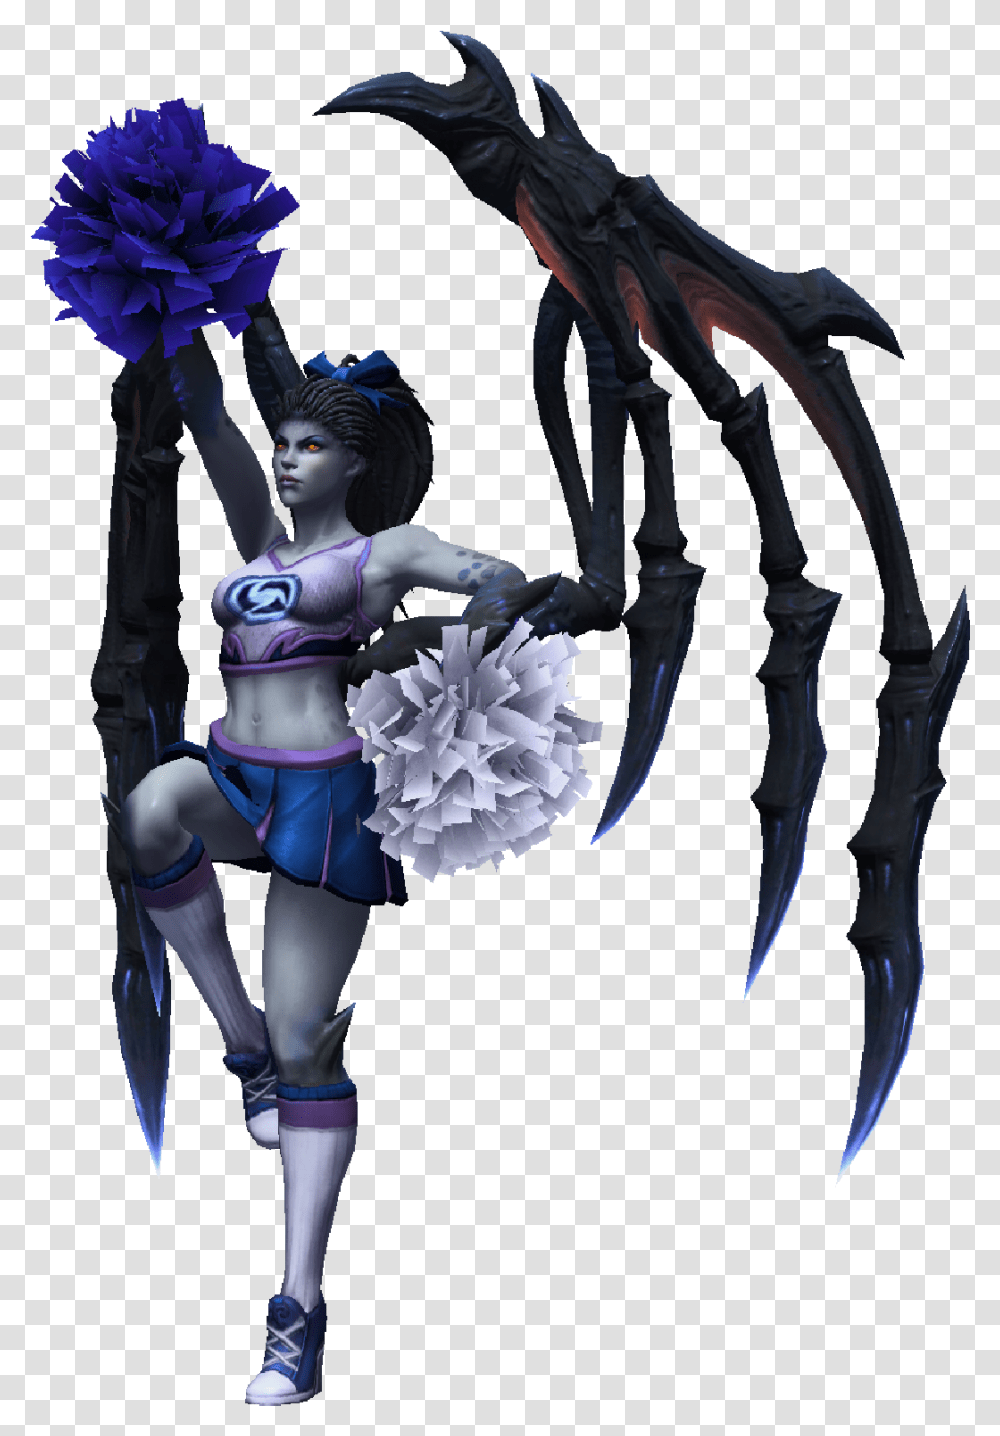 Kerrigan Cheerleader Champion Skin Stand Ready Illustration, Costume, Person, Dance Pose, Leisure Activities Transparent Png